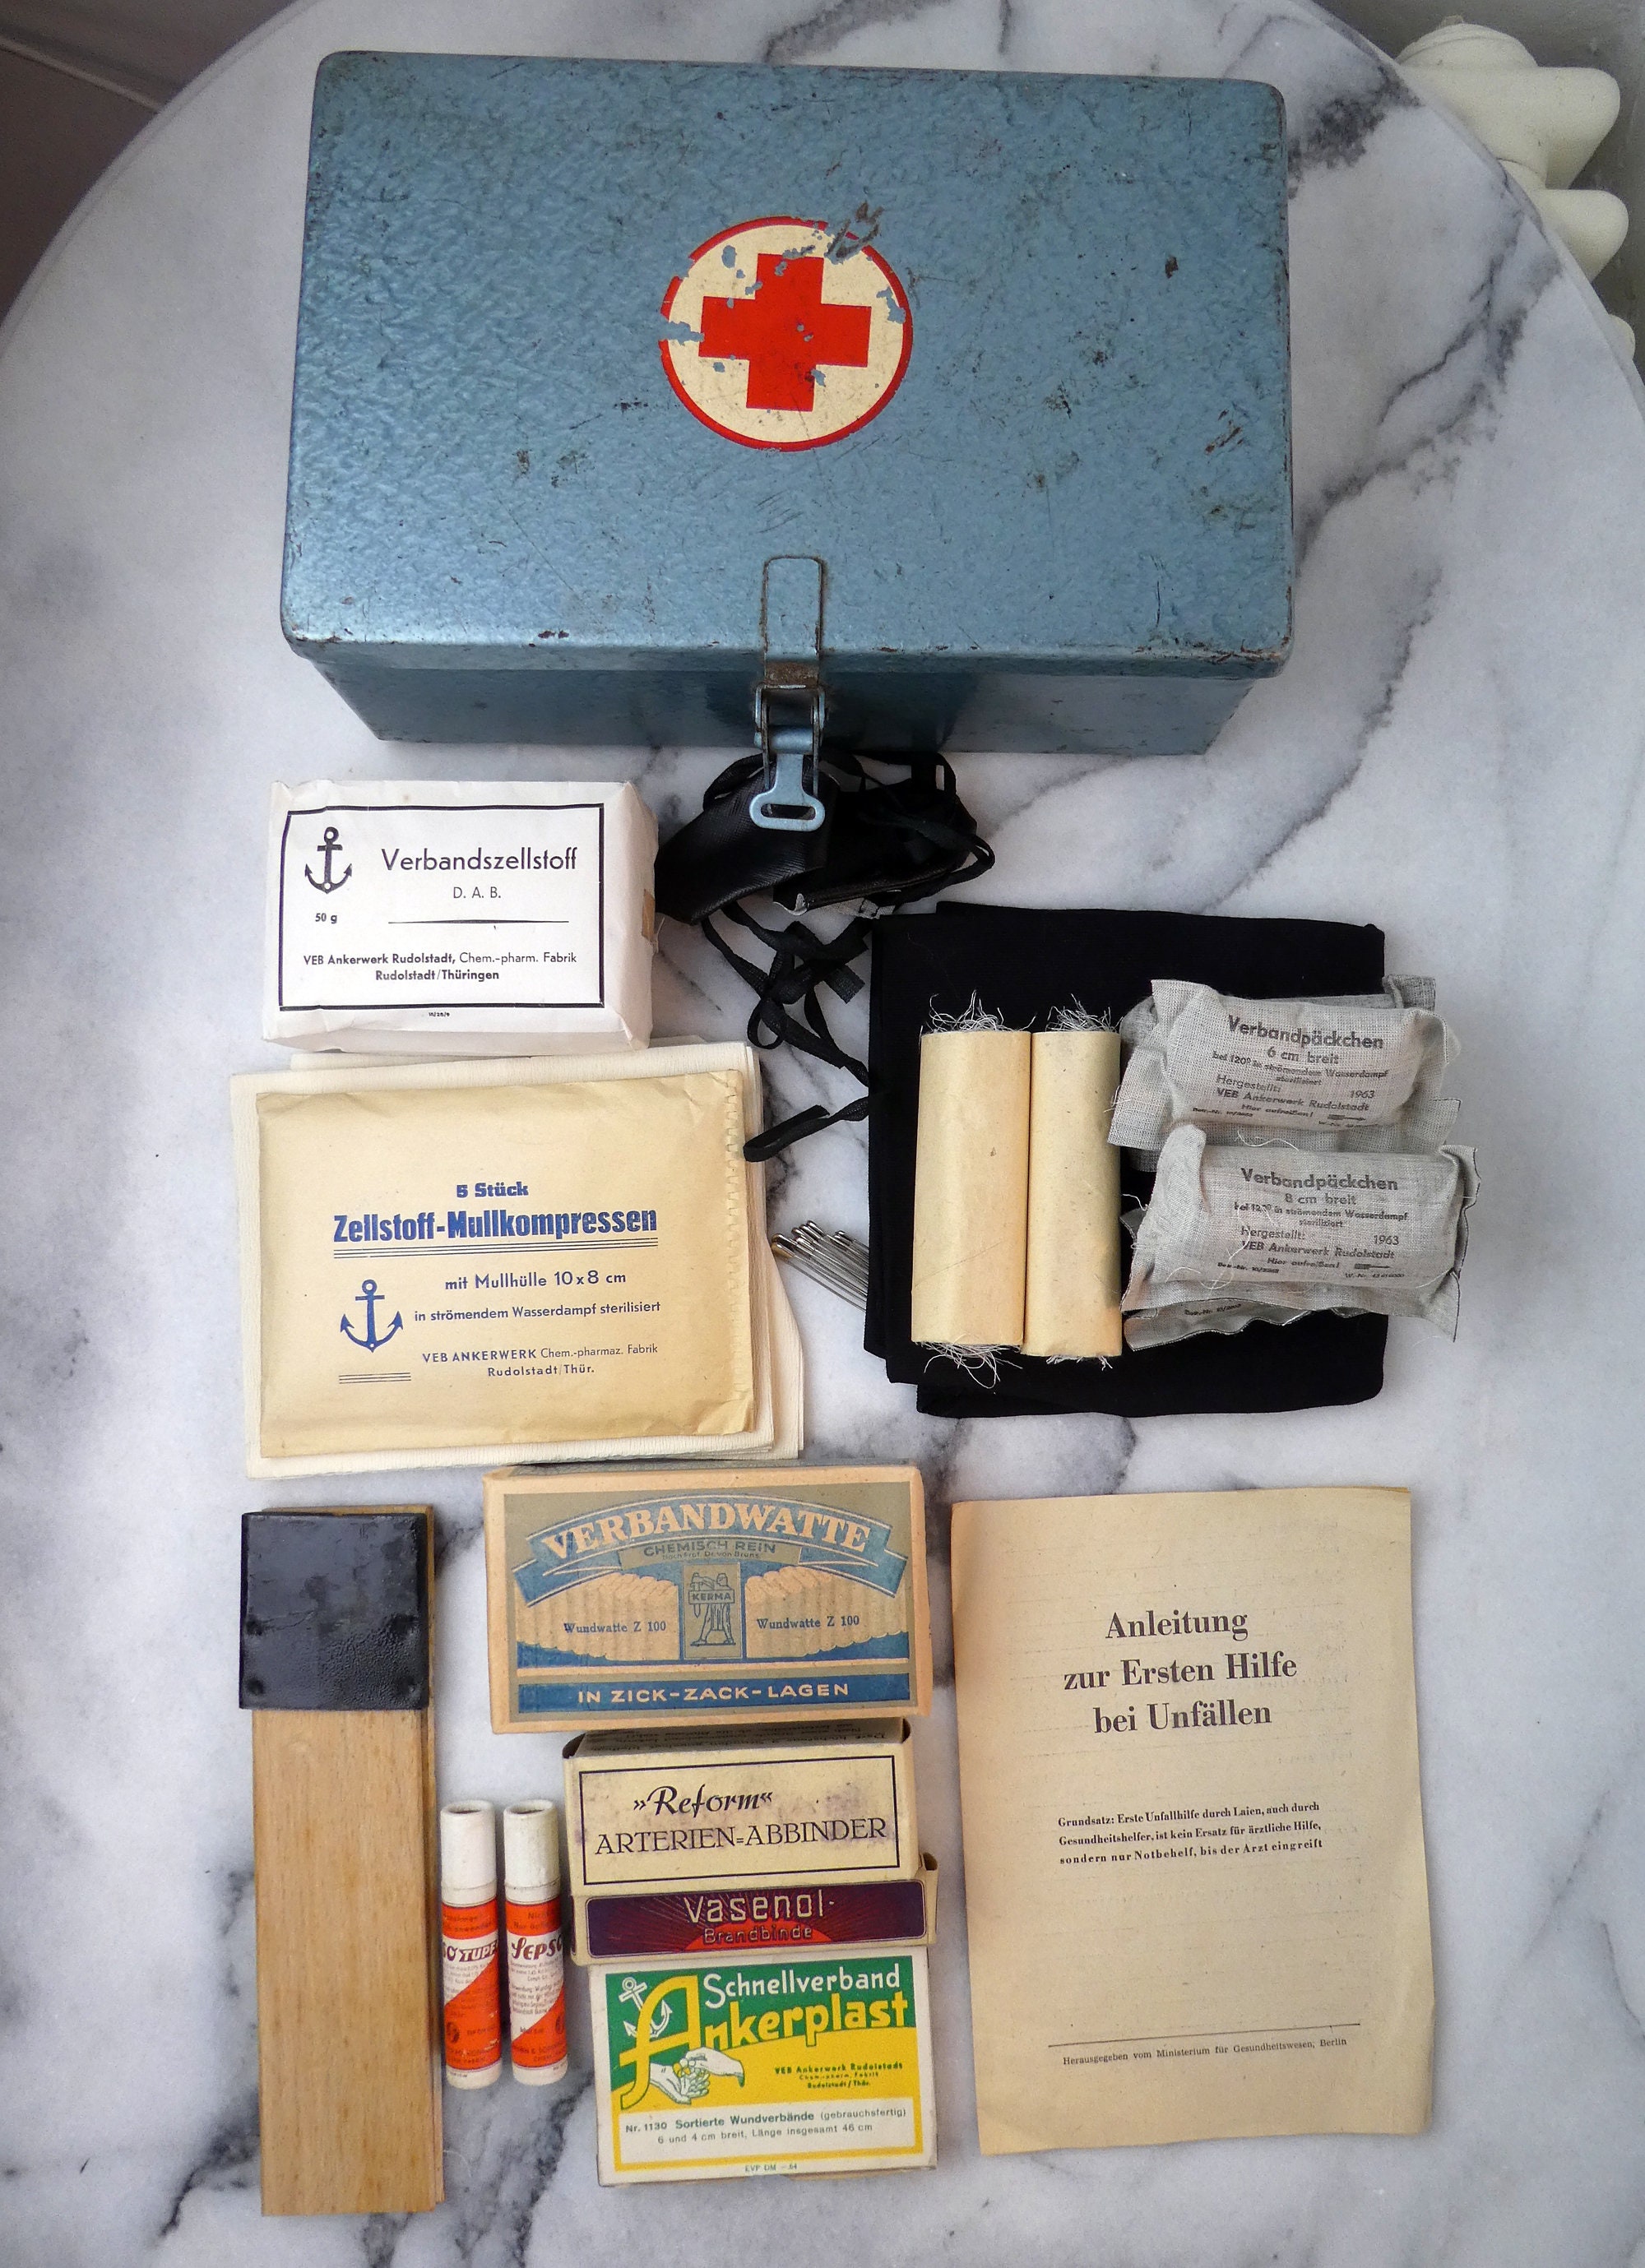 Vintage 1960s Medical First Aid Car Kit Made in East Germany GDR, Emergency  First Aid Metal Box With Original Bandages, Medicines, Paperwork 